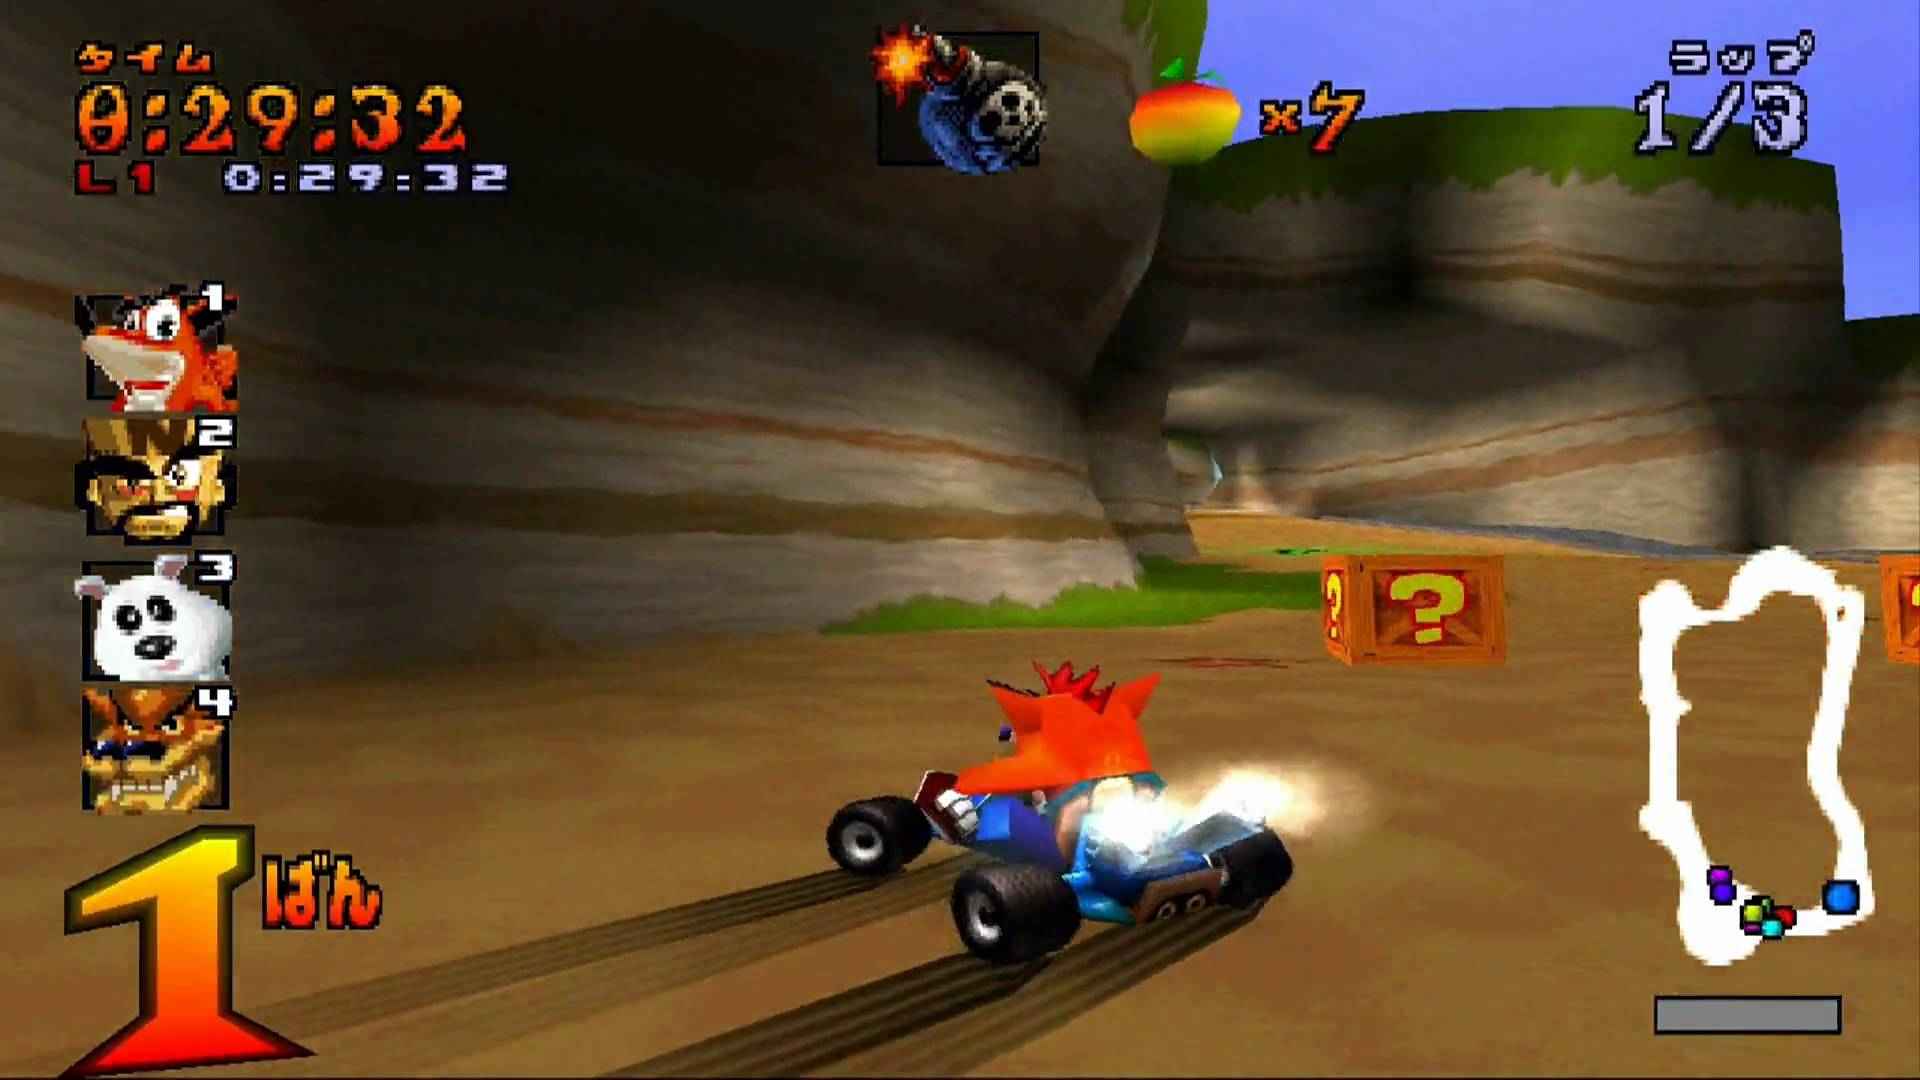 Crash Bandicoot Racing Listed For PS4 In PlayStation Survey